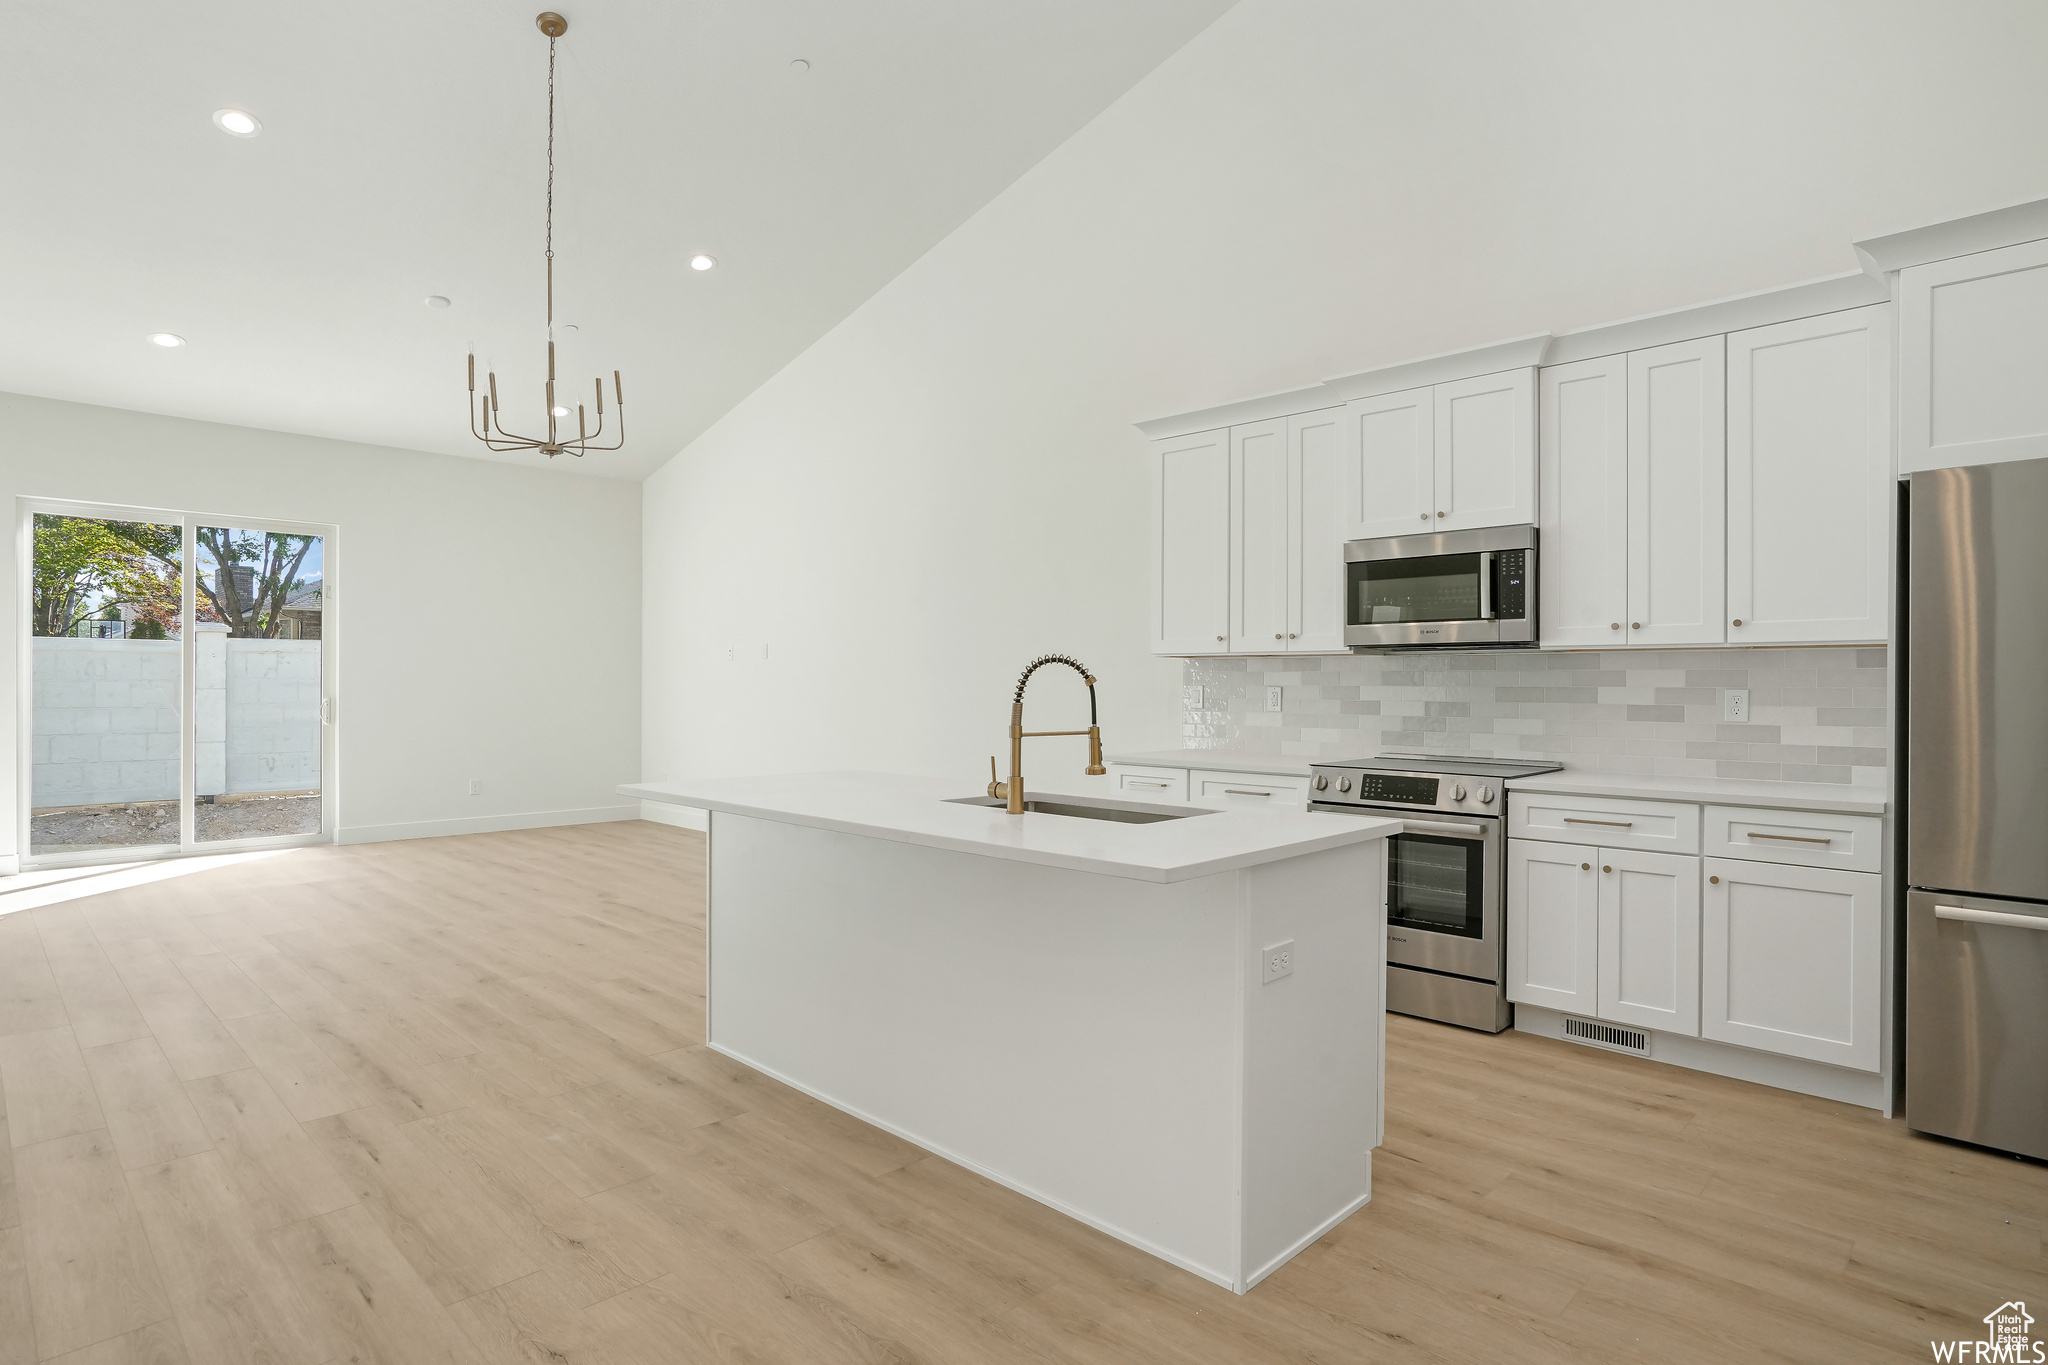 Kitchen with stainless steel appliances, decorative light fixtures, a notable chandelier, white cabinetry, and light hardwood / wood-style flooring